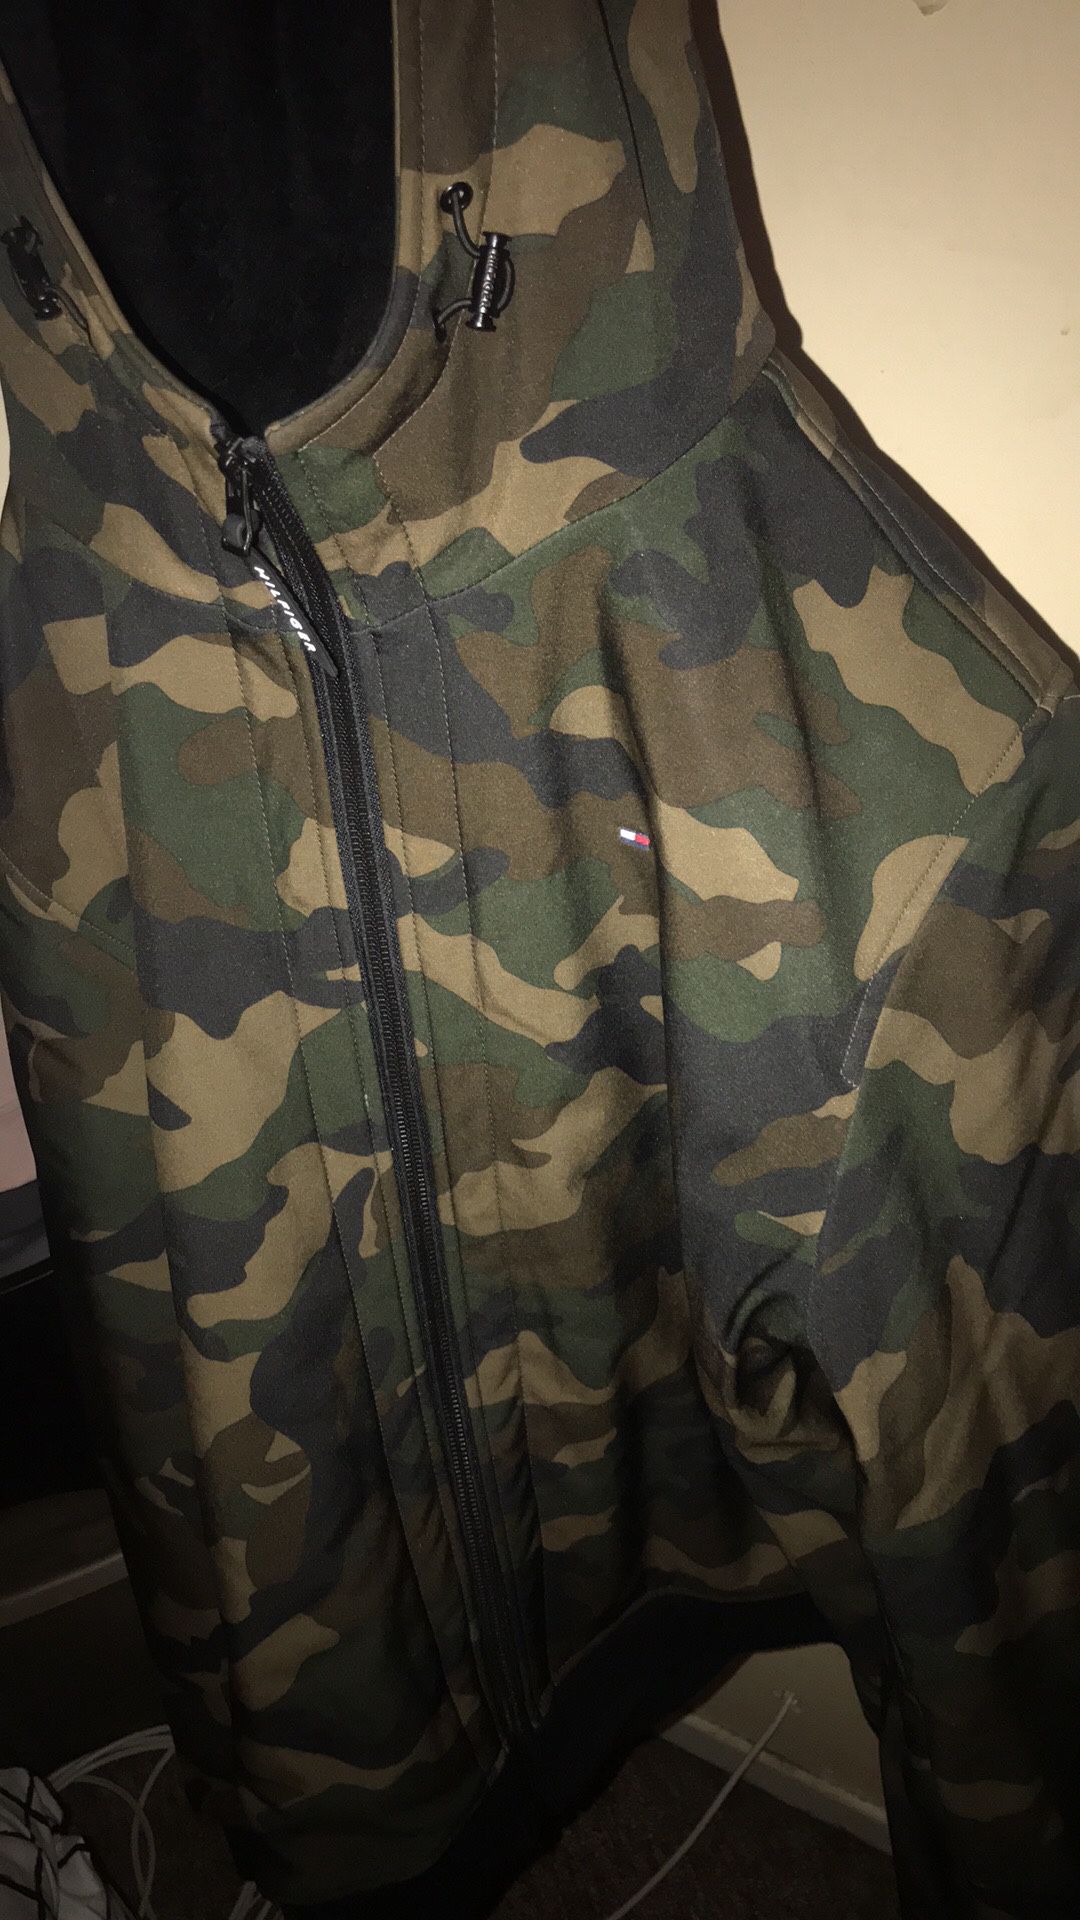 Hilfiger Army Bomber Jacket for Sale in MN - OfferUp